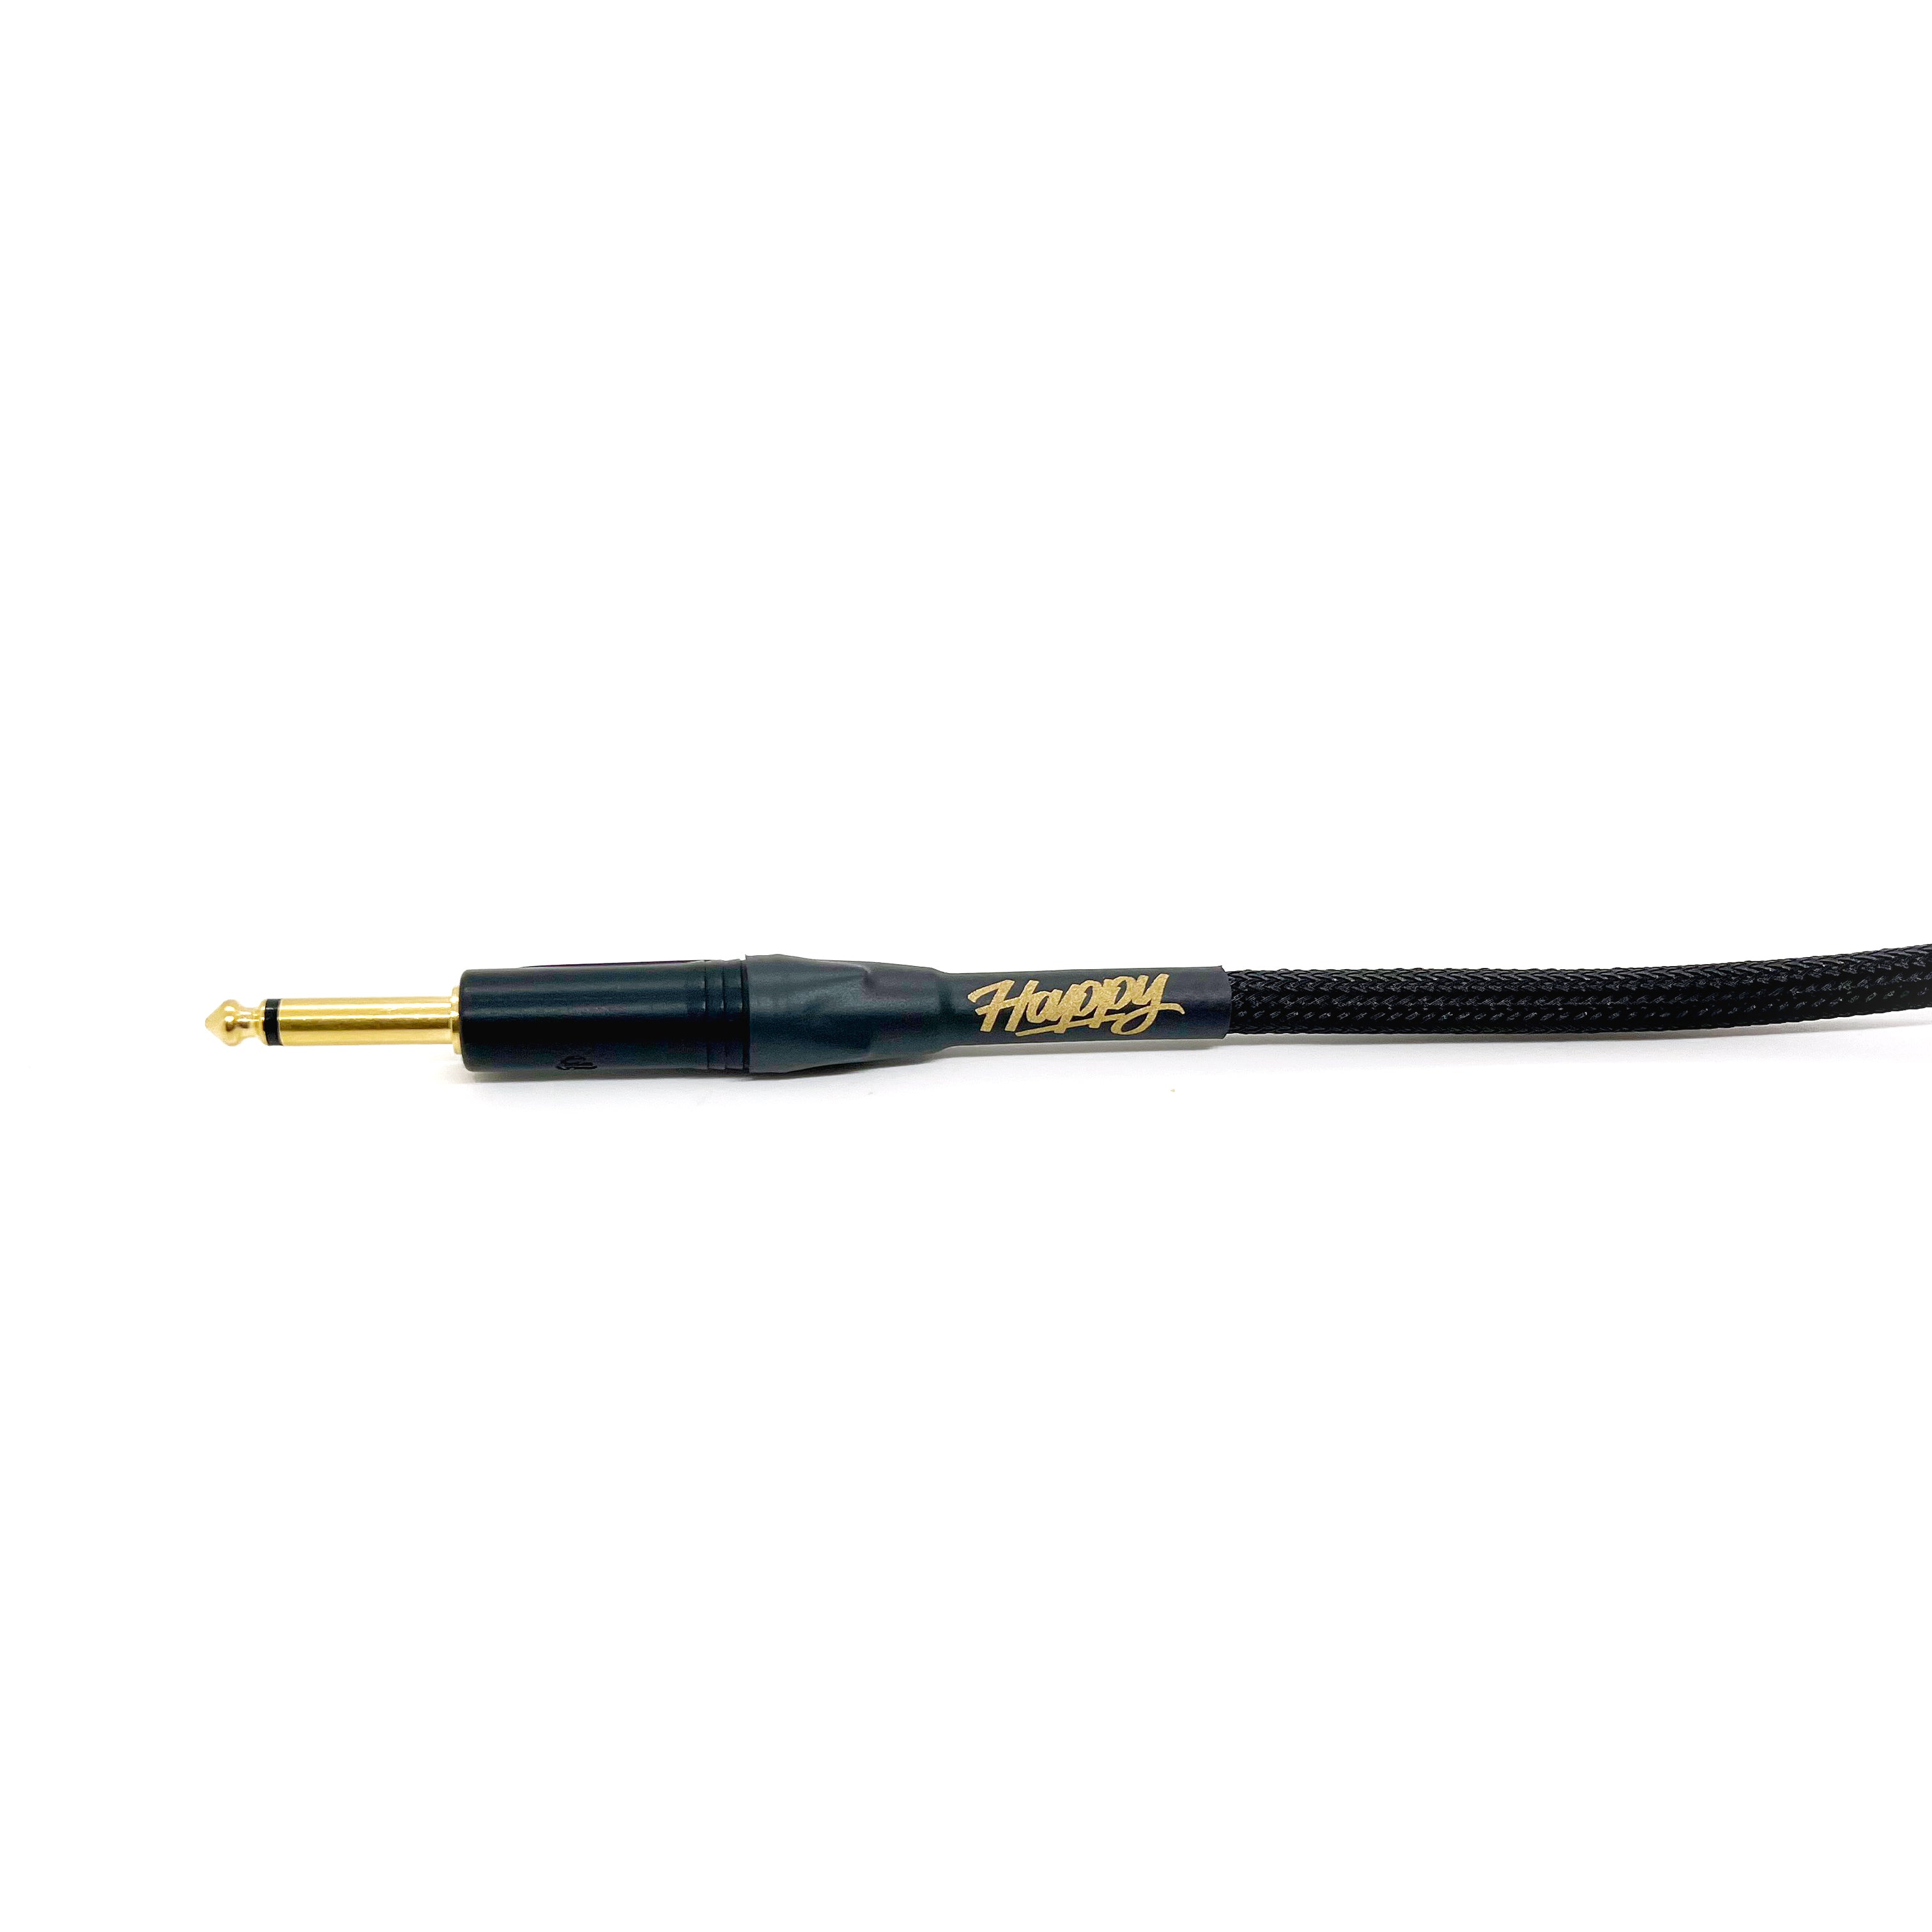 The Kiesel Silent Instrument Cable - Black